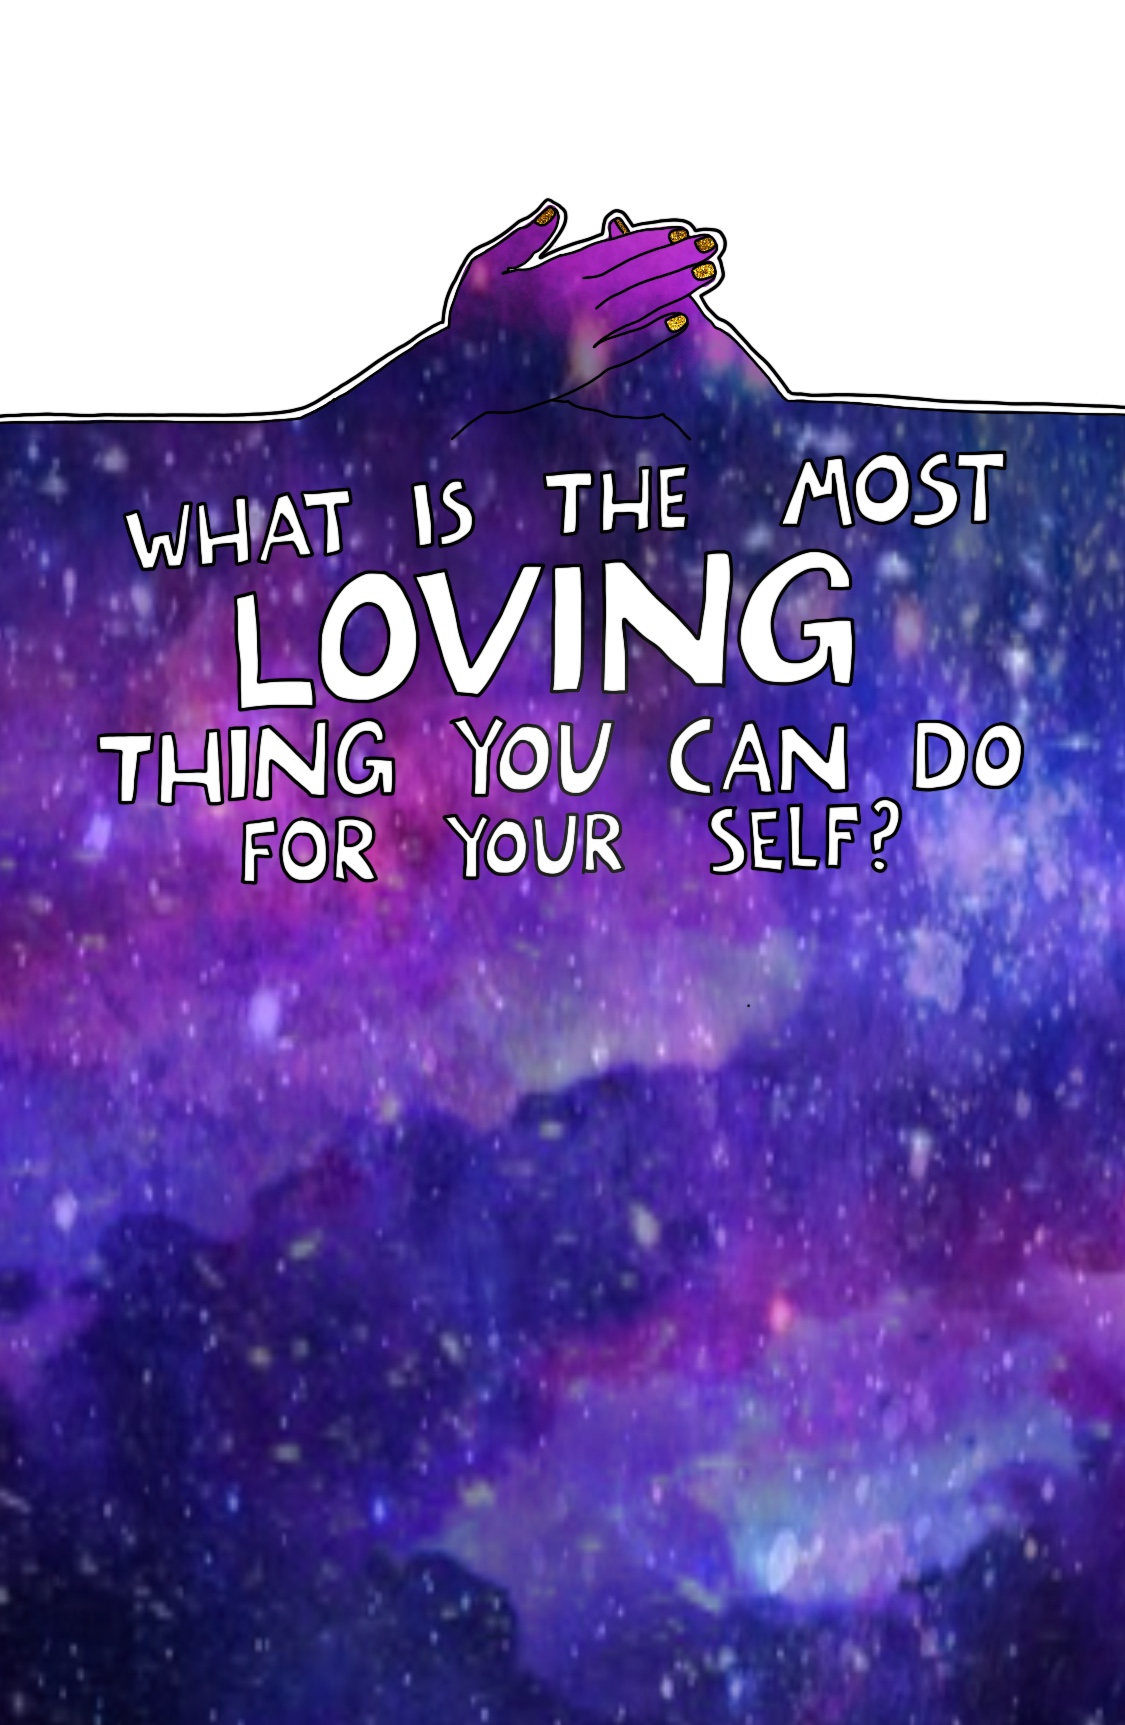 Journal Prompt: What is the most loving thing you can do for yourself?